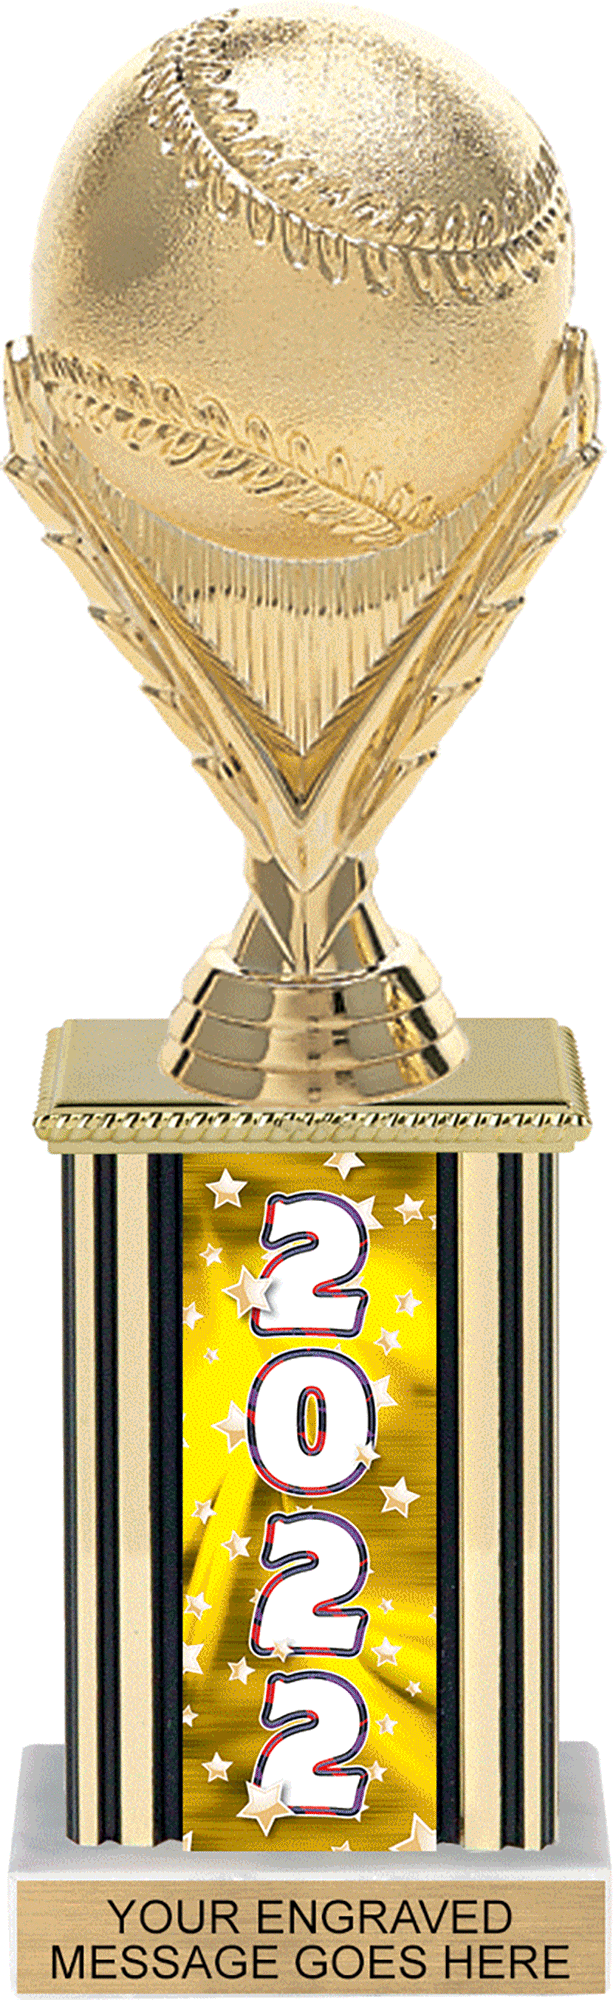 Year Glowing Stars Rectangle Column Trophy - Gold 10 inch